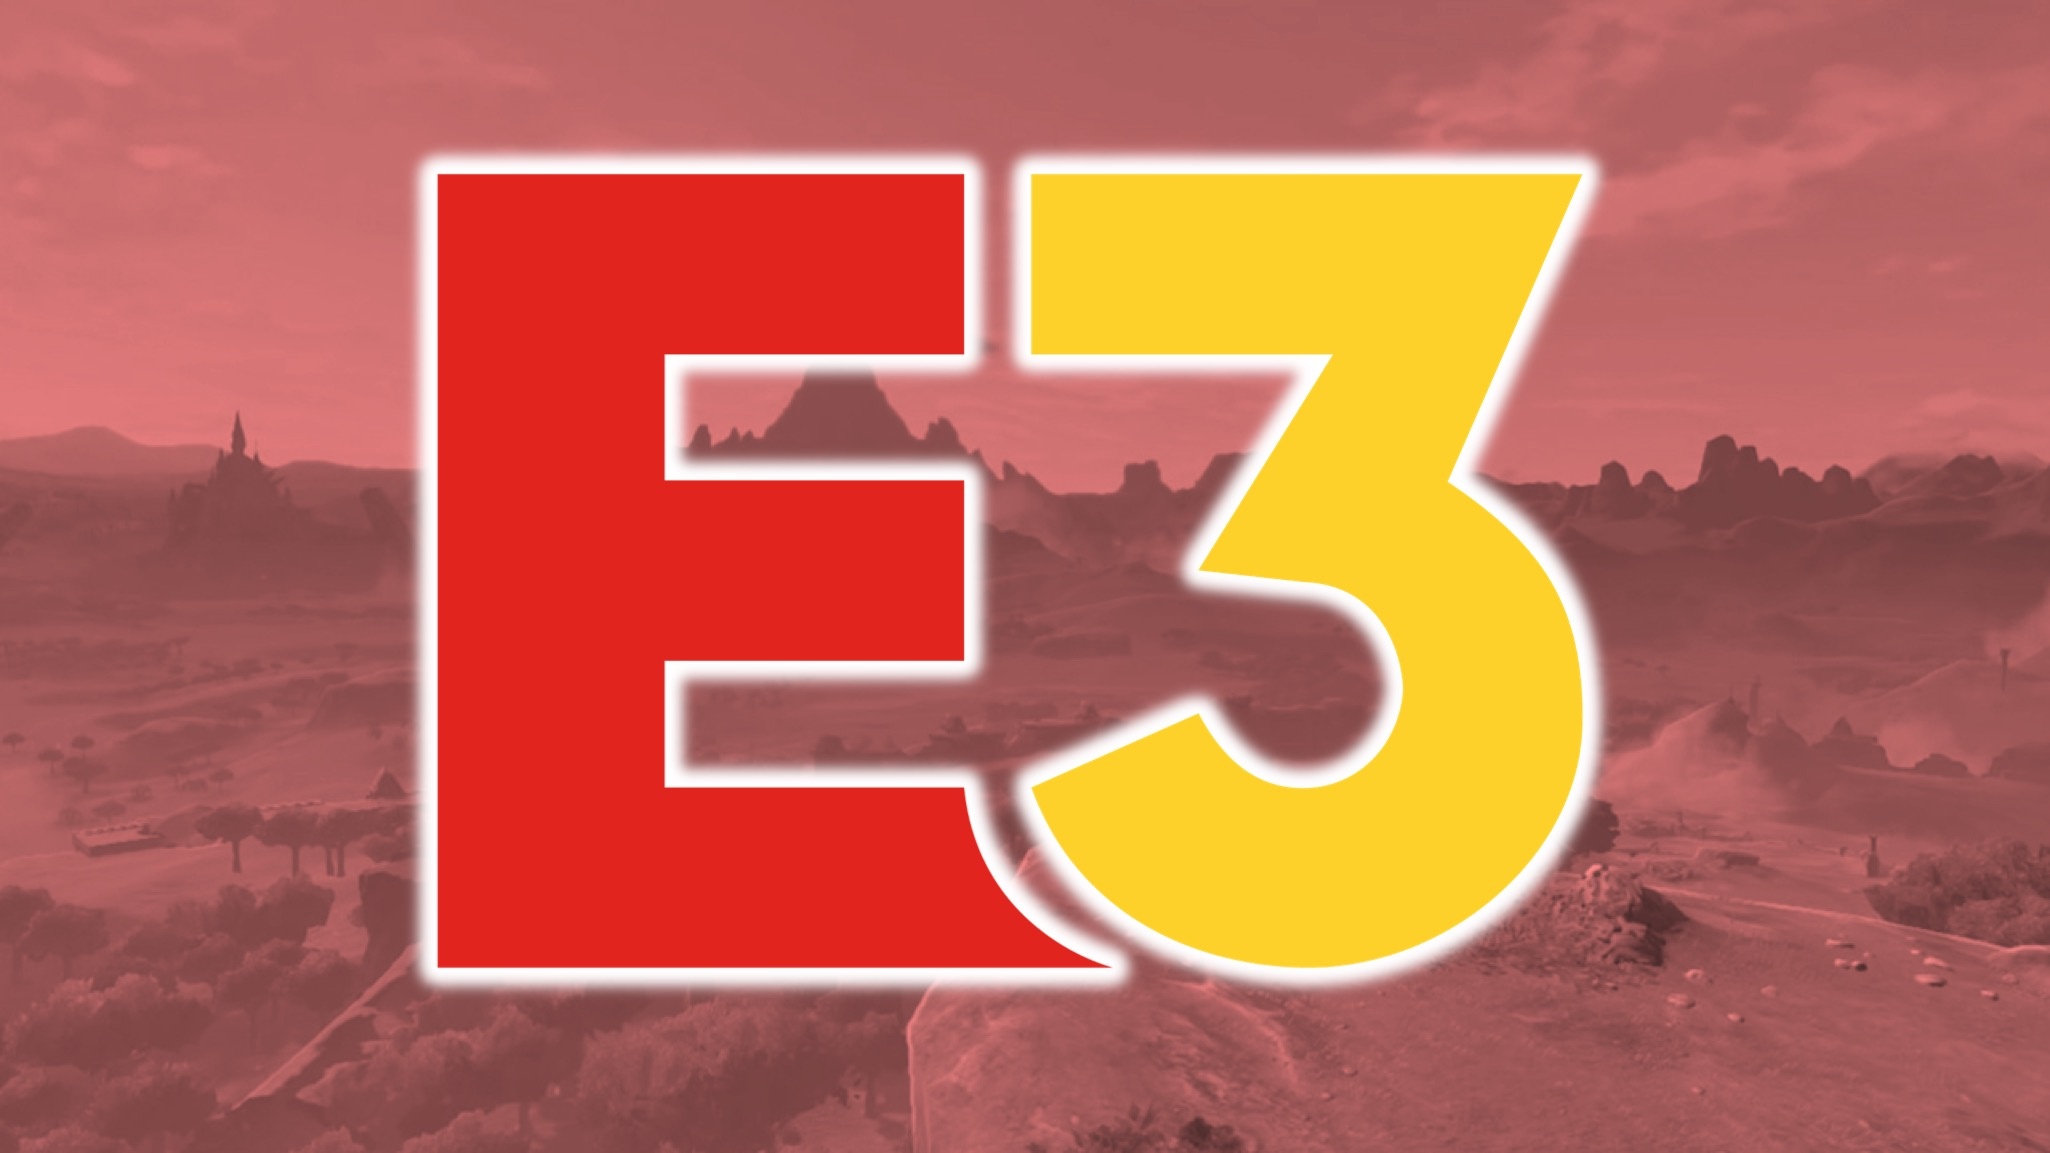 E3 2020 Pitch Document Reveals a Shift Toward Influencers and Celebrities